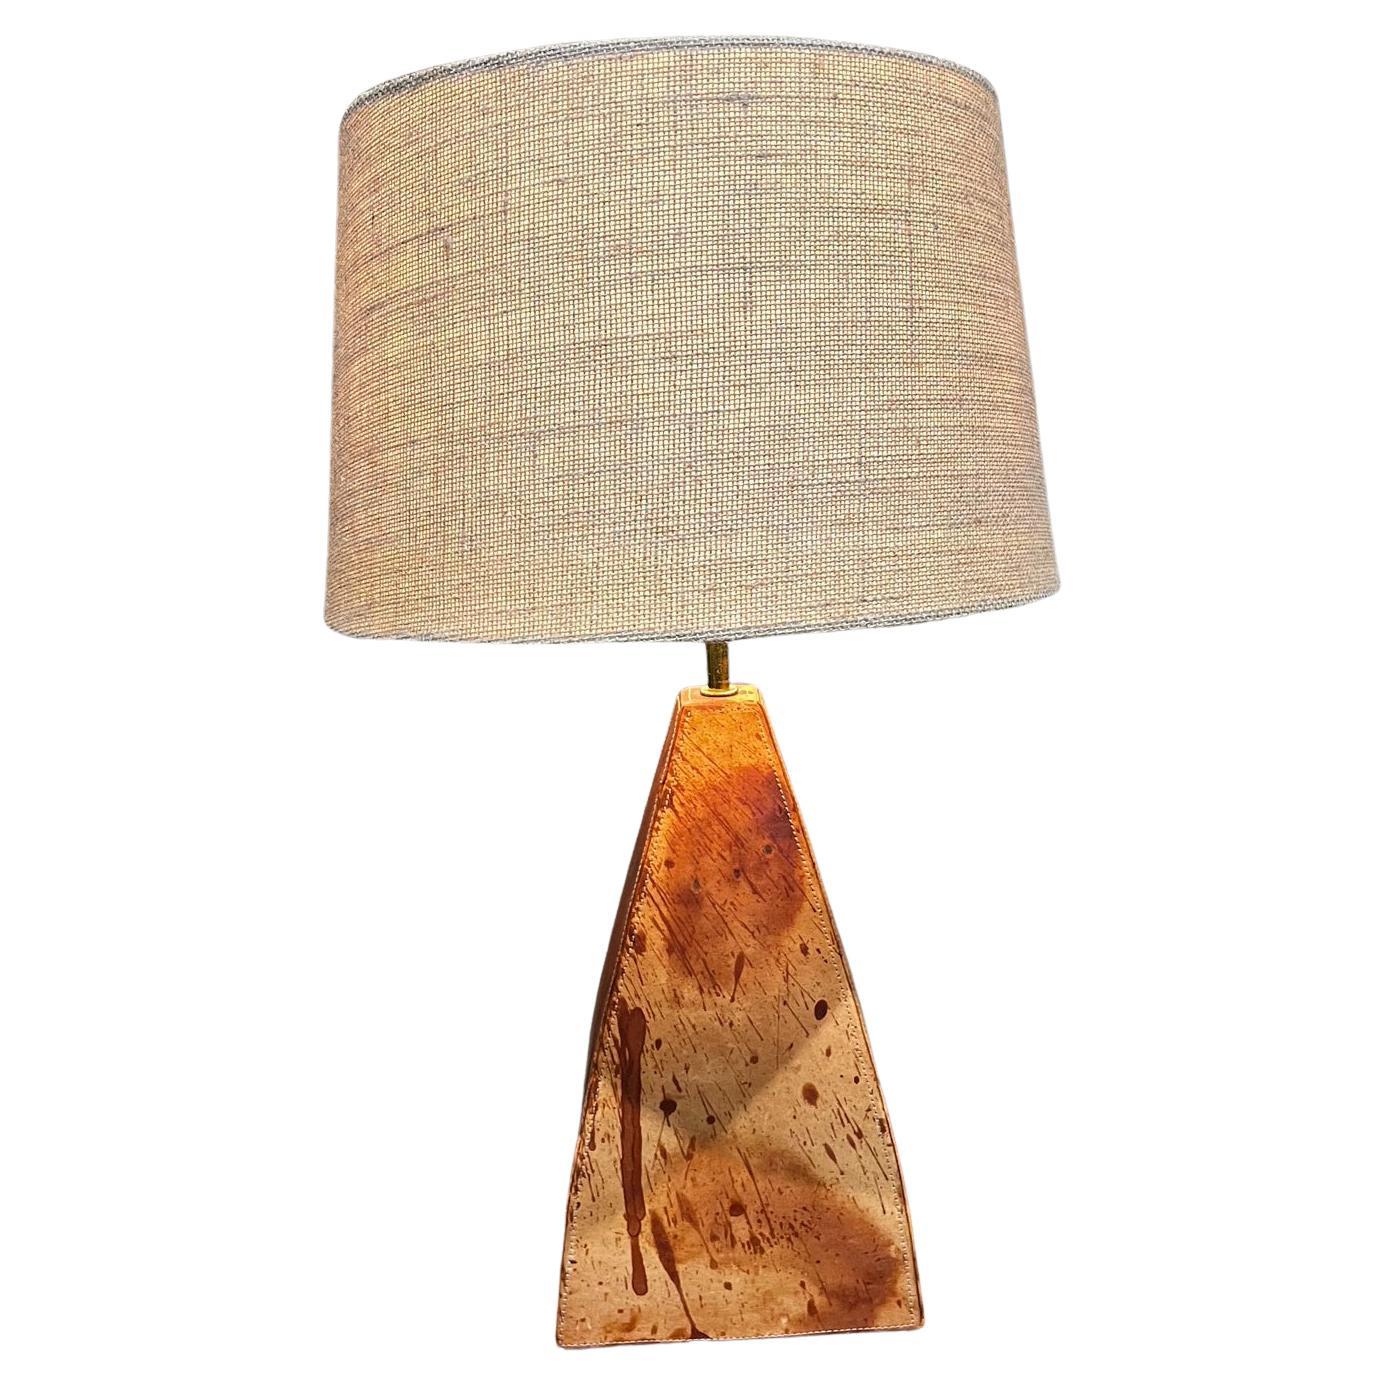 1970s Artistic Table Lamp Abstract Modern Leather Wrapped Metal For Sale